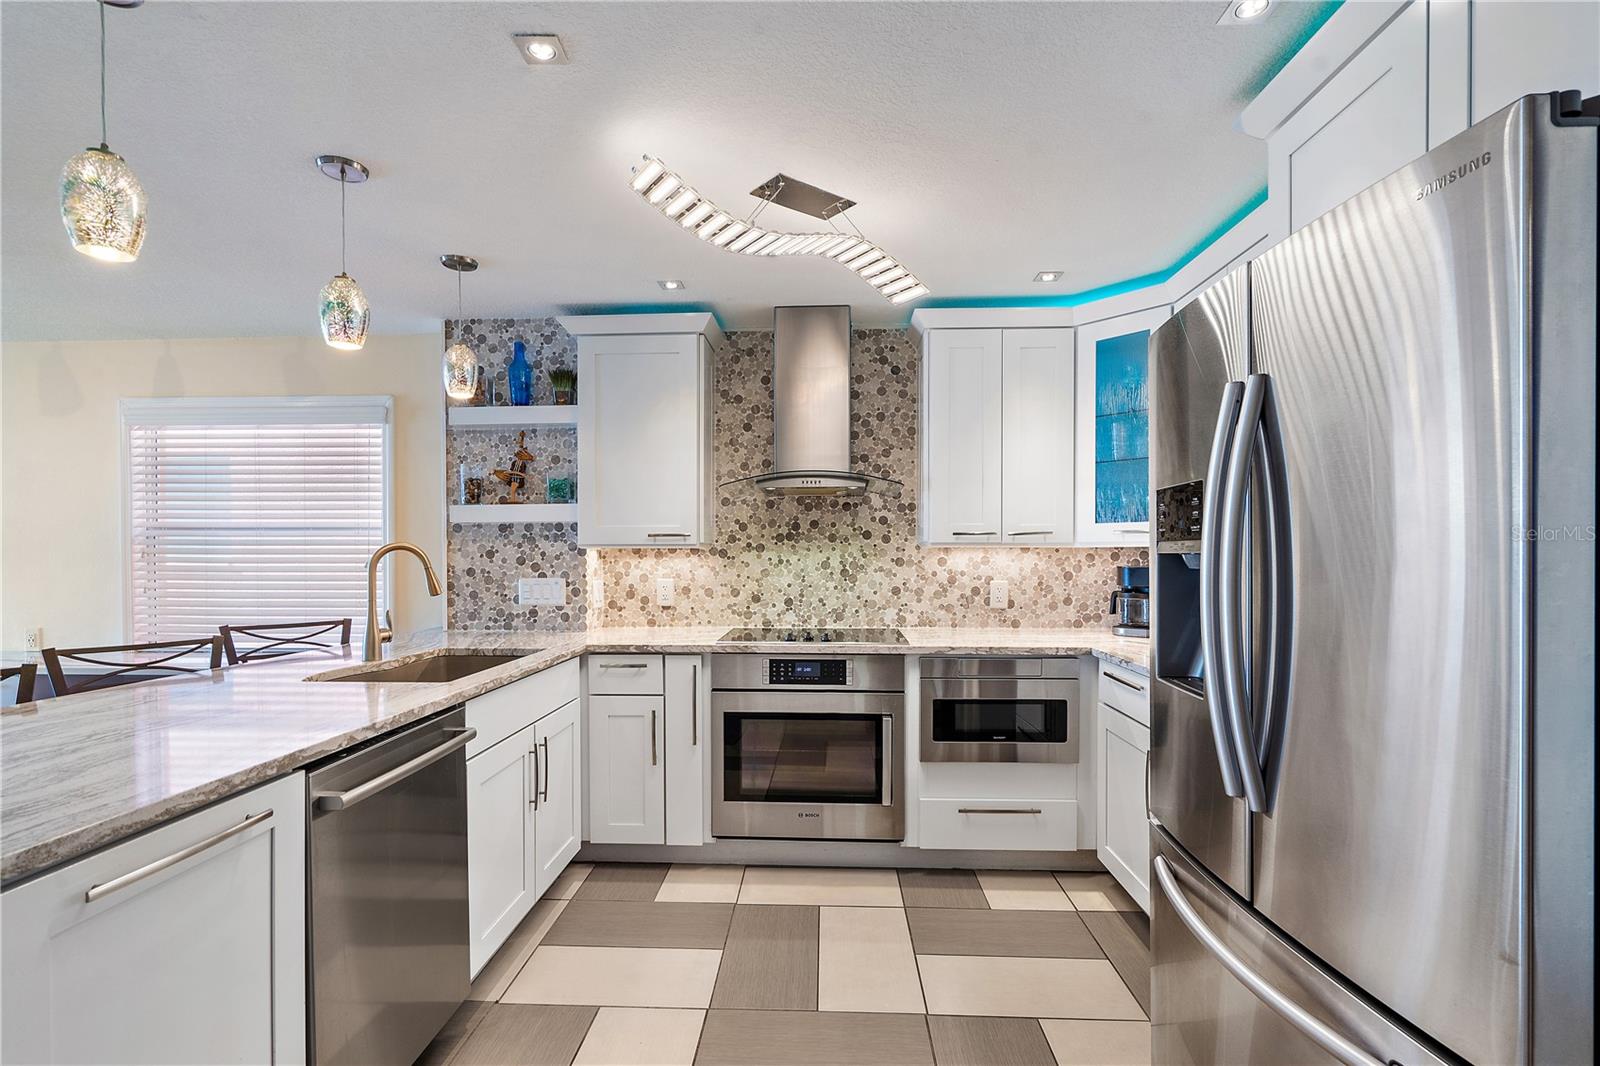 The kitchen was remodeled in 2018 with high-end quartz, plumbing, electric, SS exhaust vent, new SS appliances, recessed lighting, LED lighting, and a central ceiling light with a "wave" design.